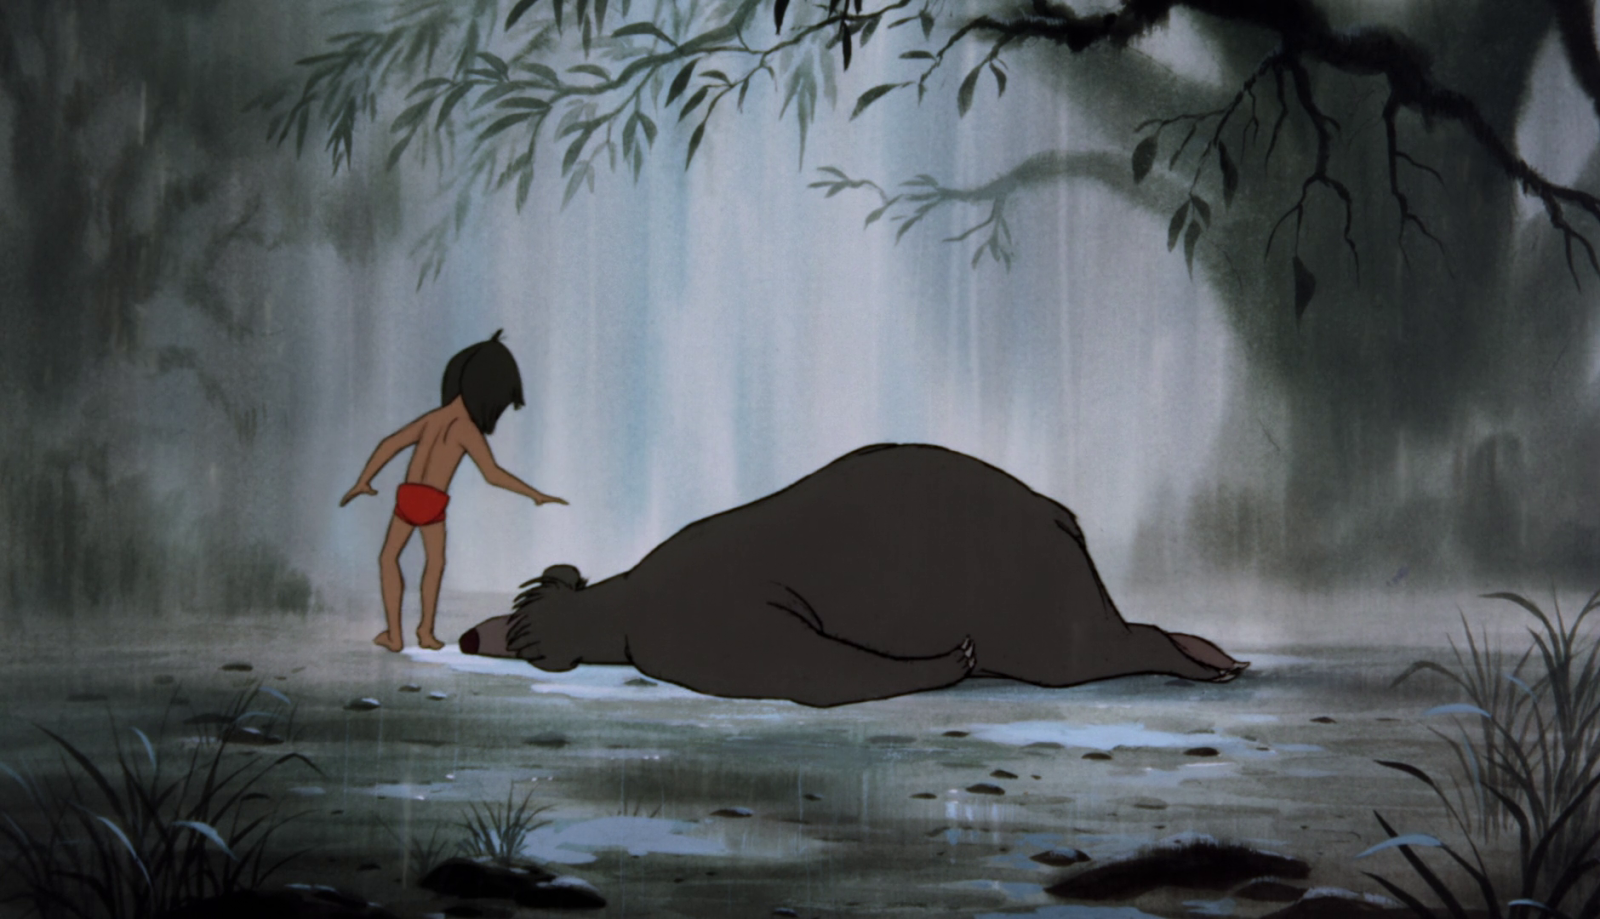 Disney Animated Movies for Life: The Jungle Book Part 4